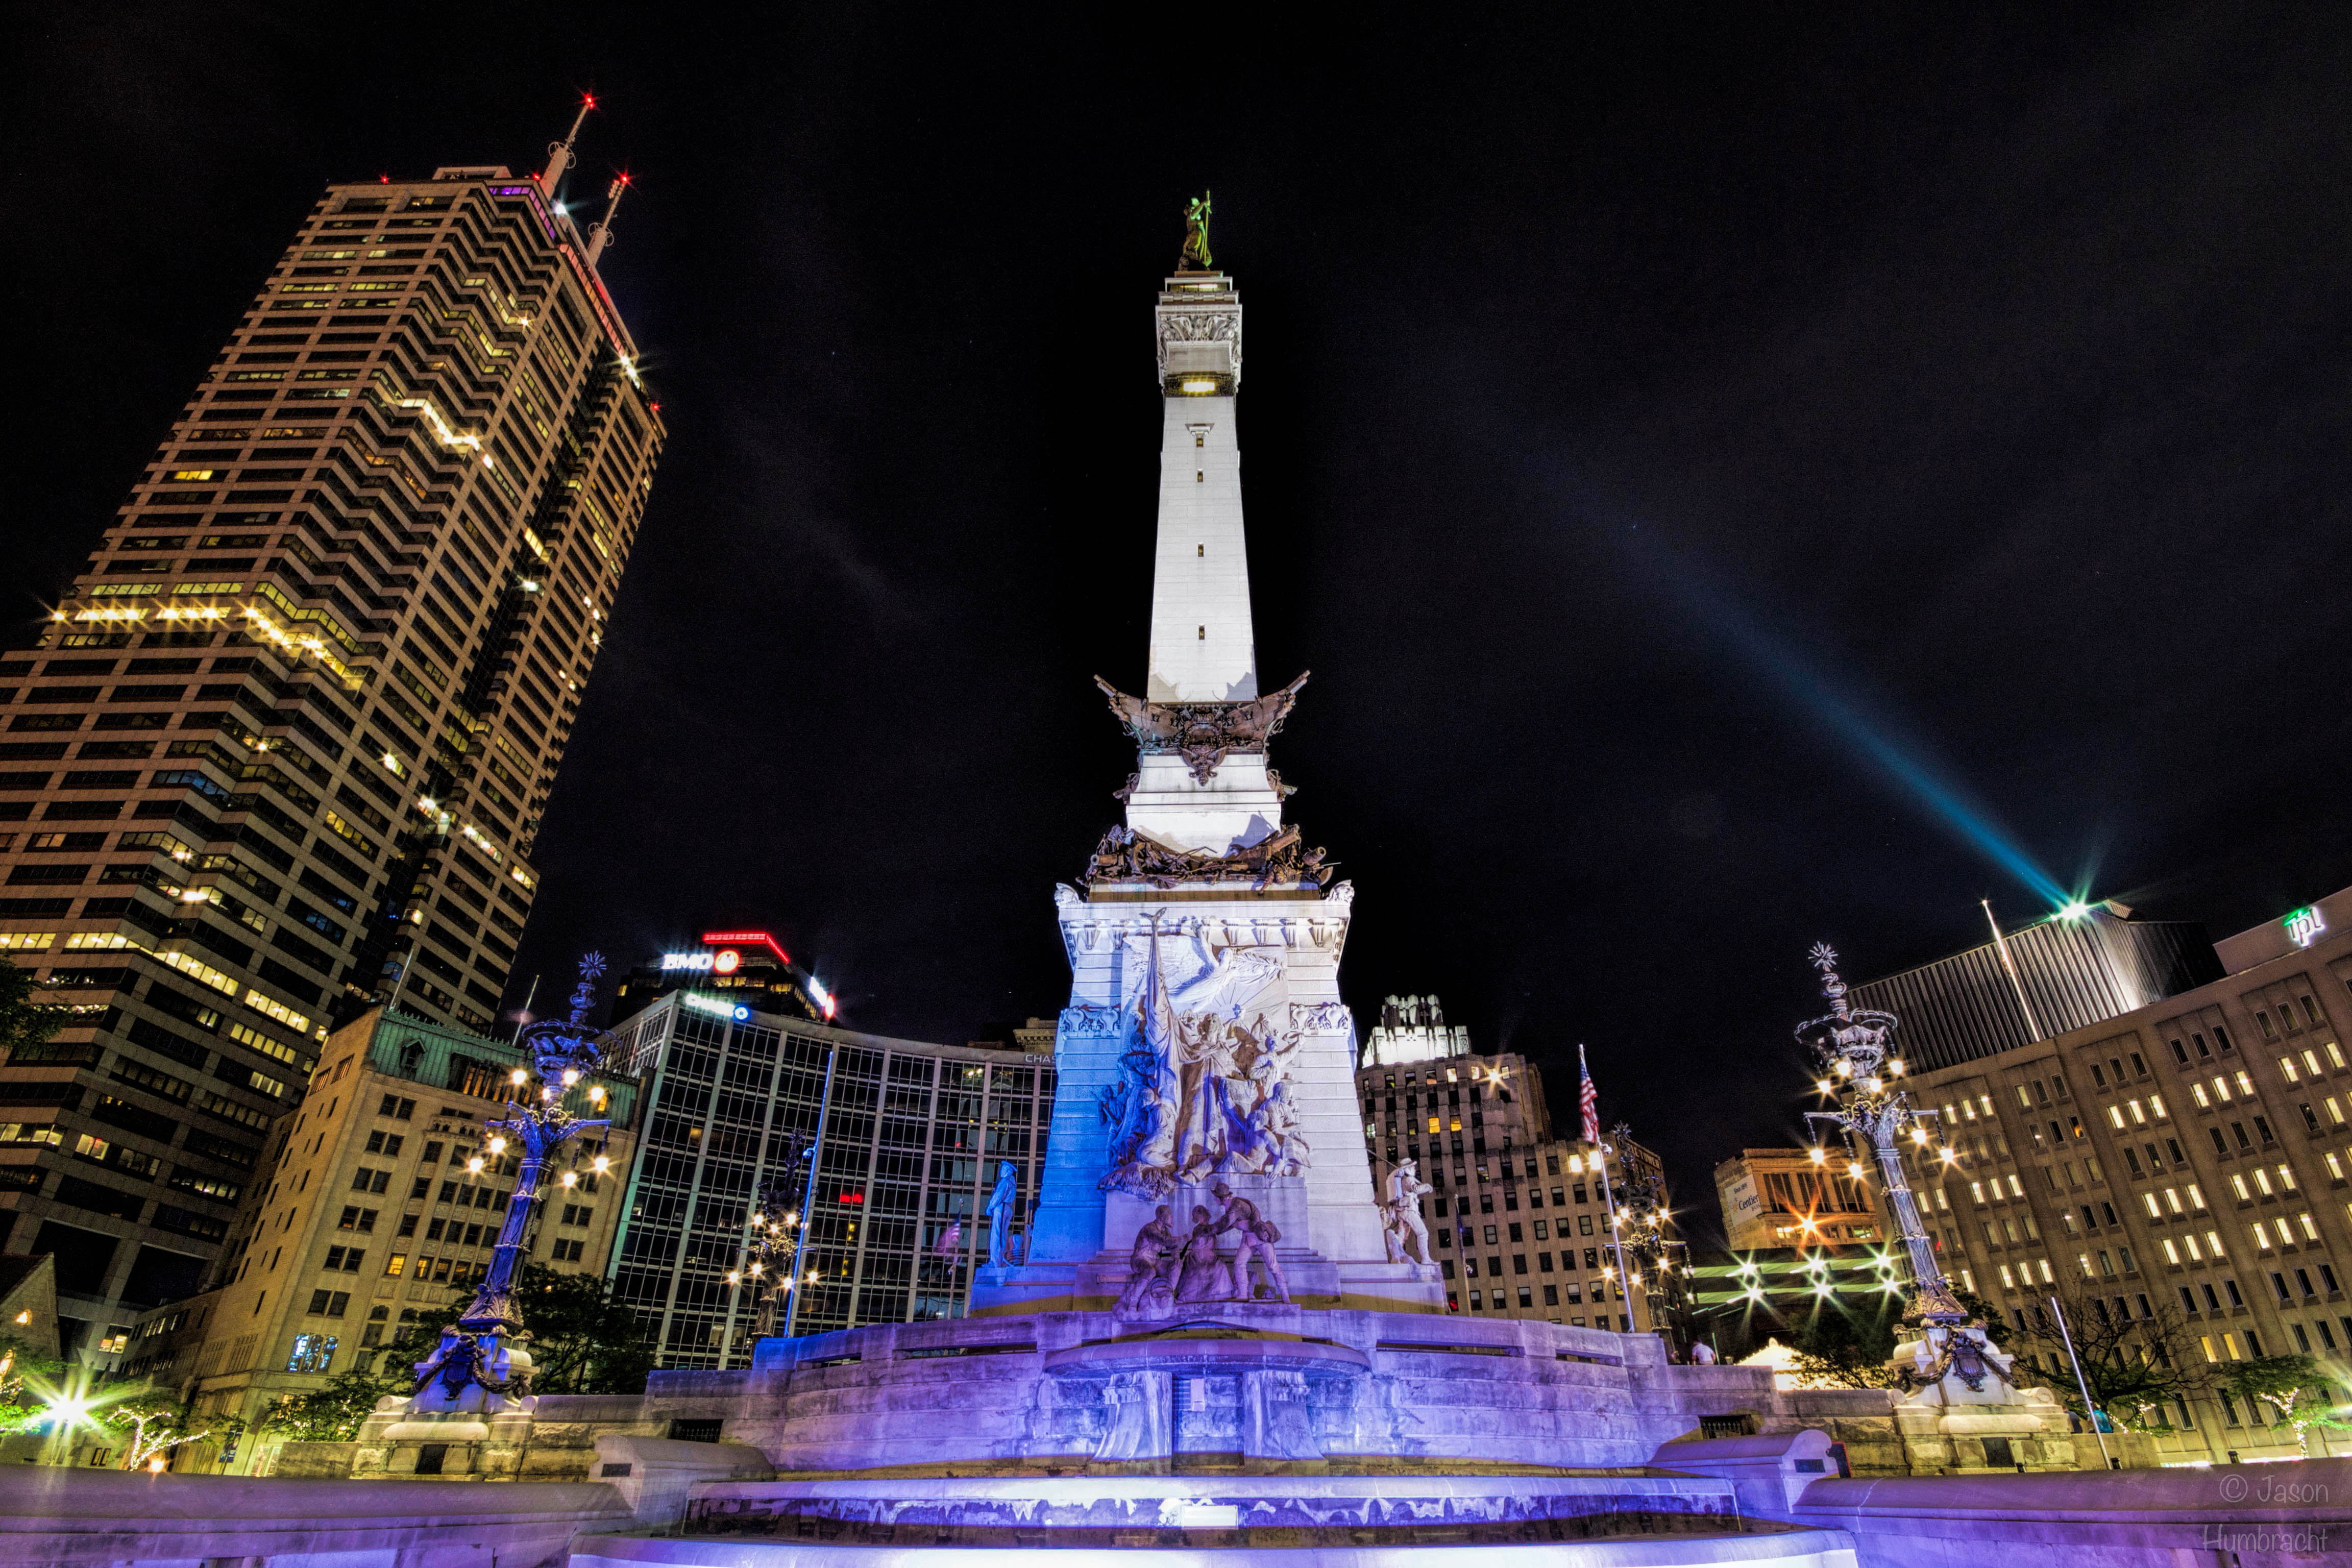 Soldiers' and Sailors' Monument | Monument Circle | Indianapolis Night | Image By Indiana Architectural Photographer Jason Humbracht